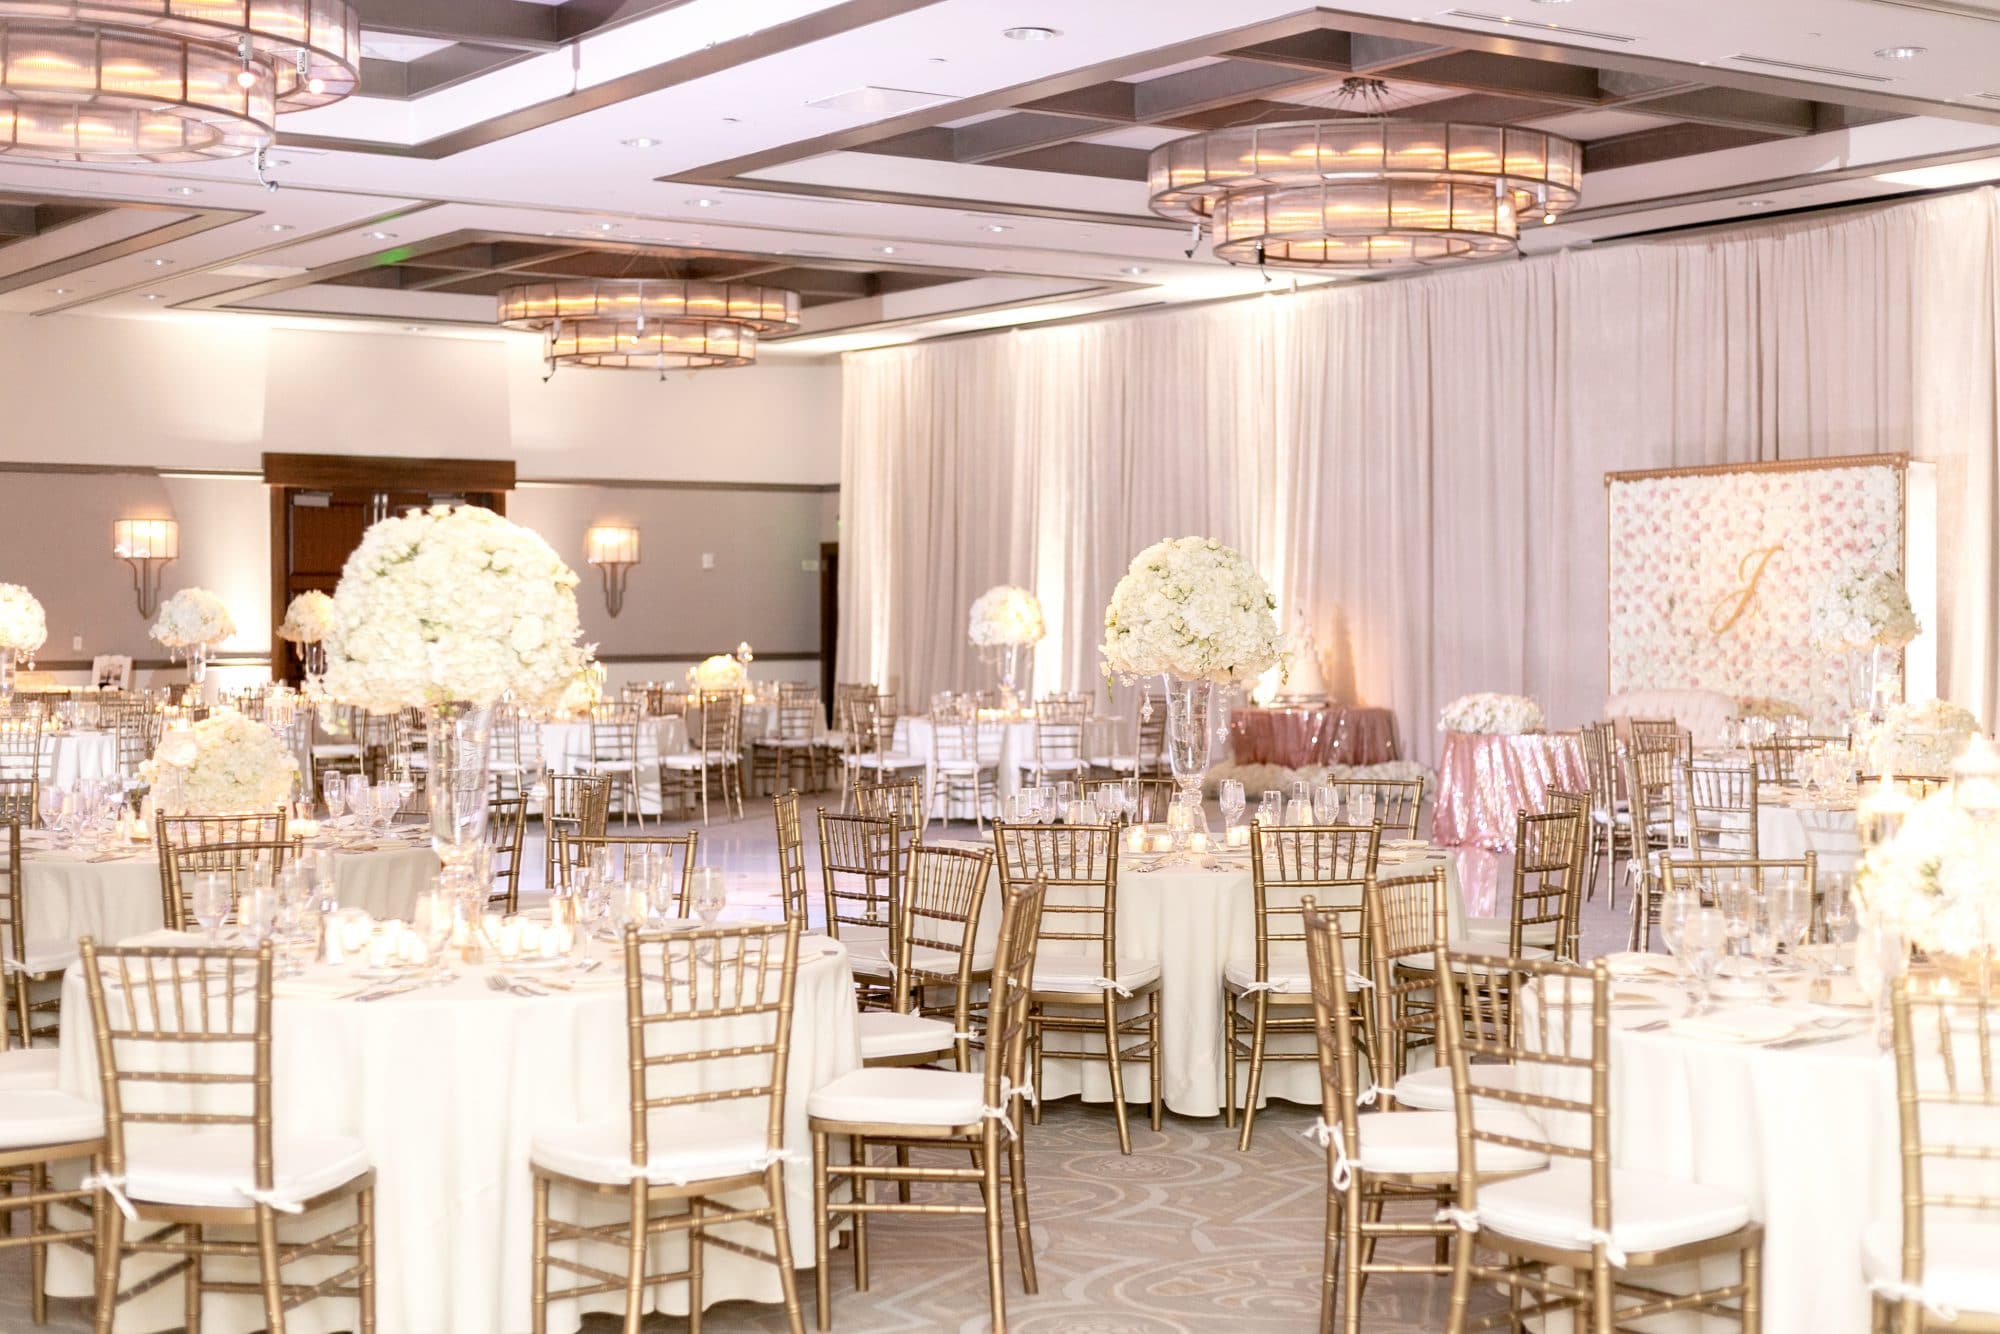 Alfond Inn - glamorous reception space with white fabric-draped walls and modern chandeliers